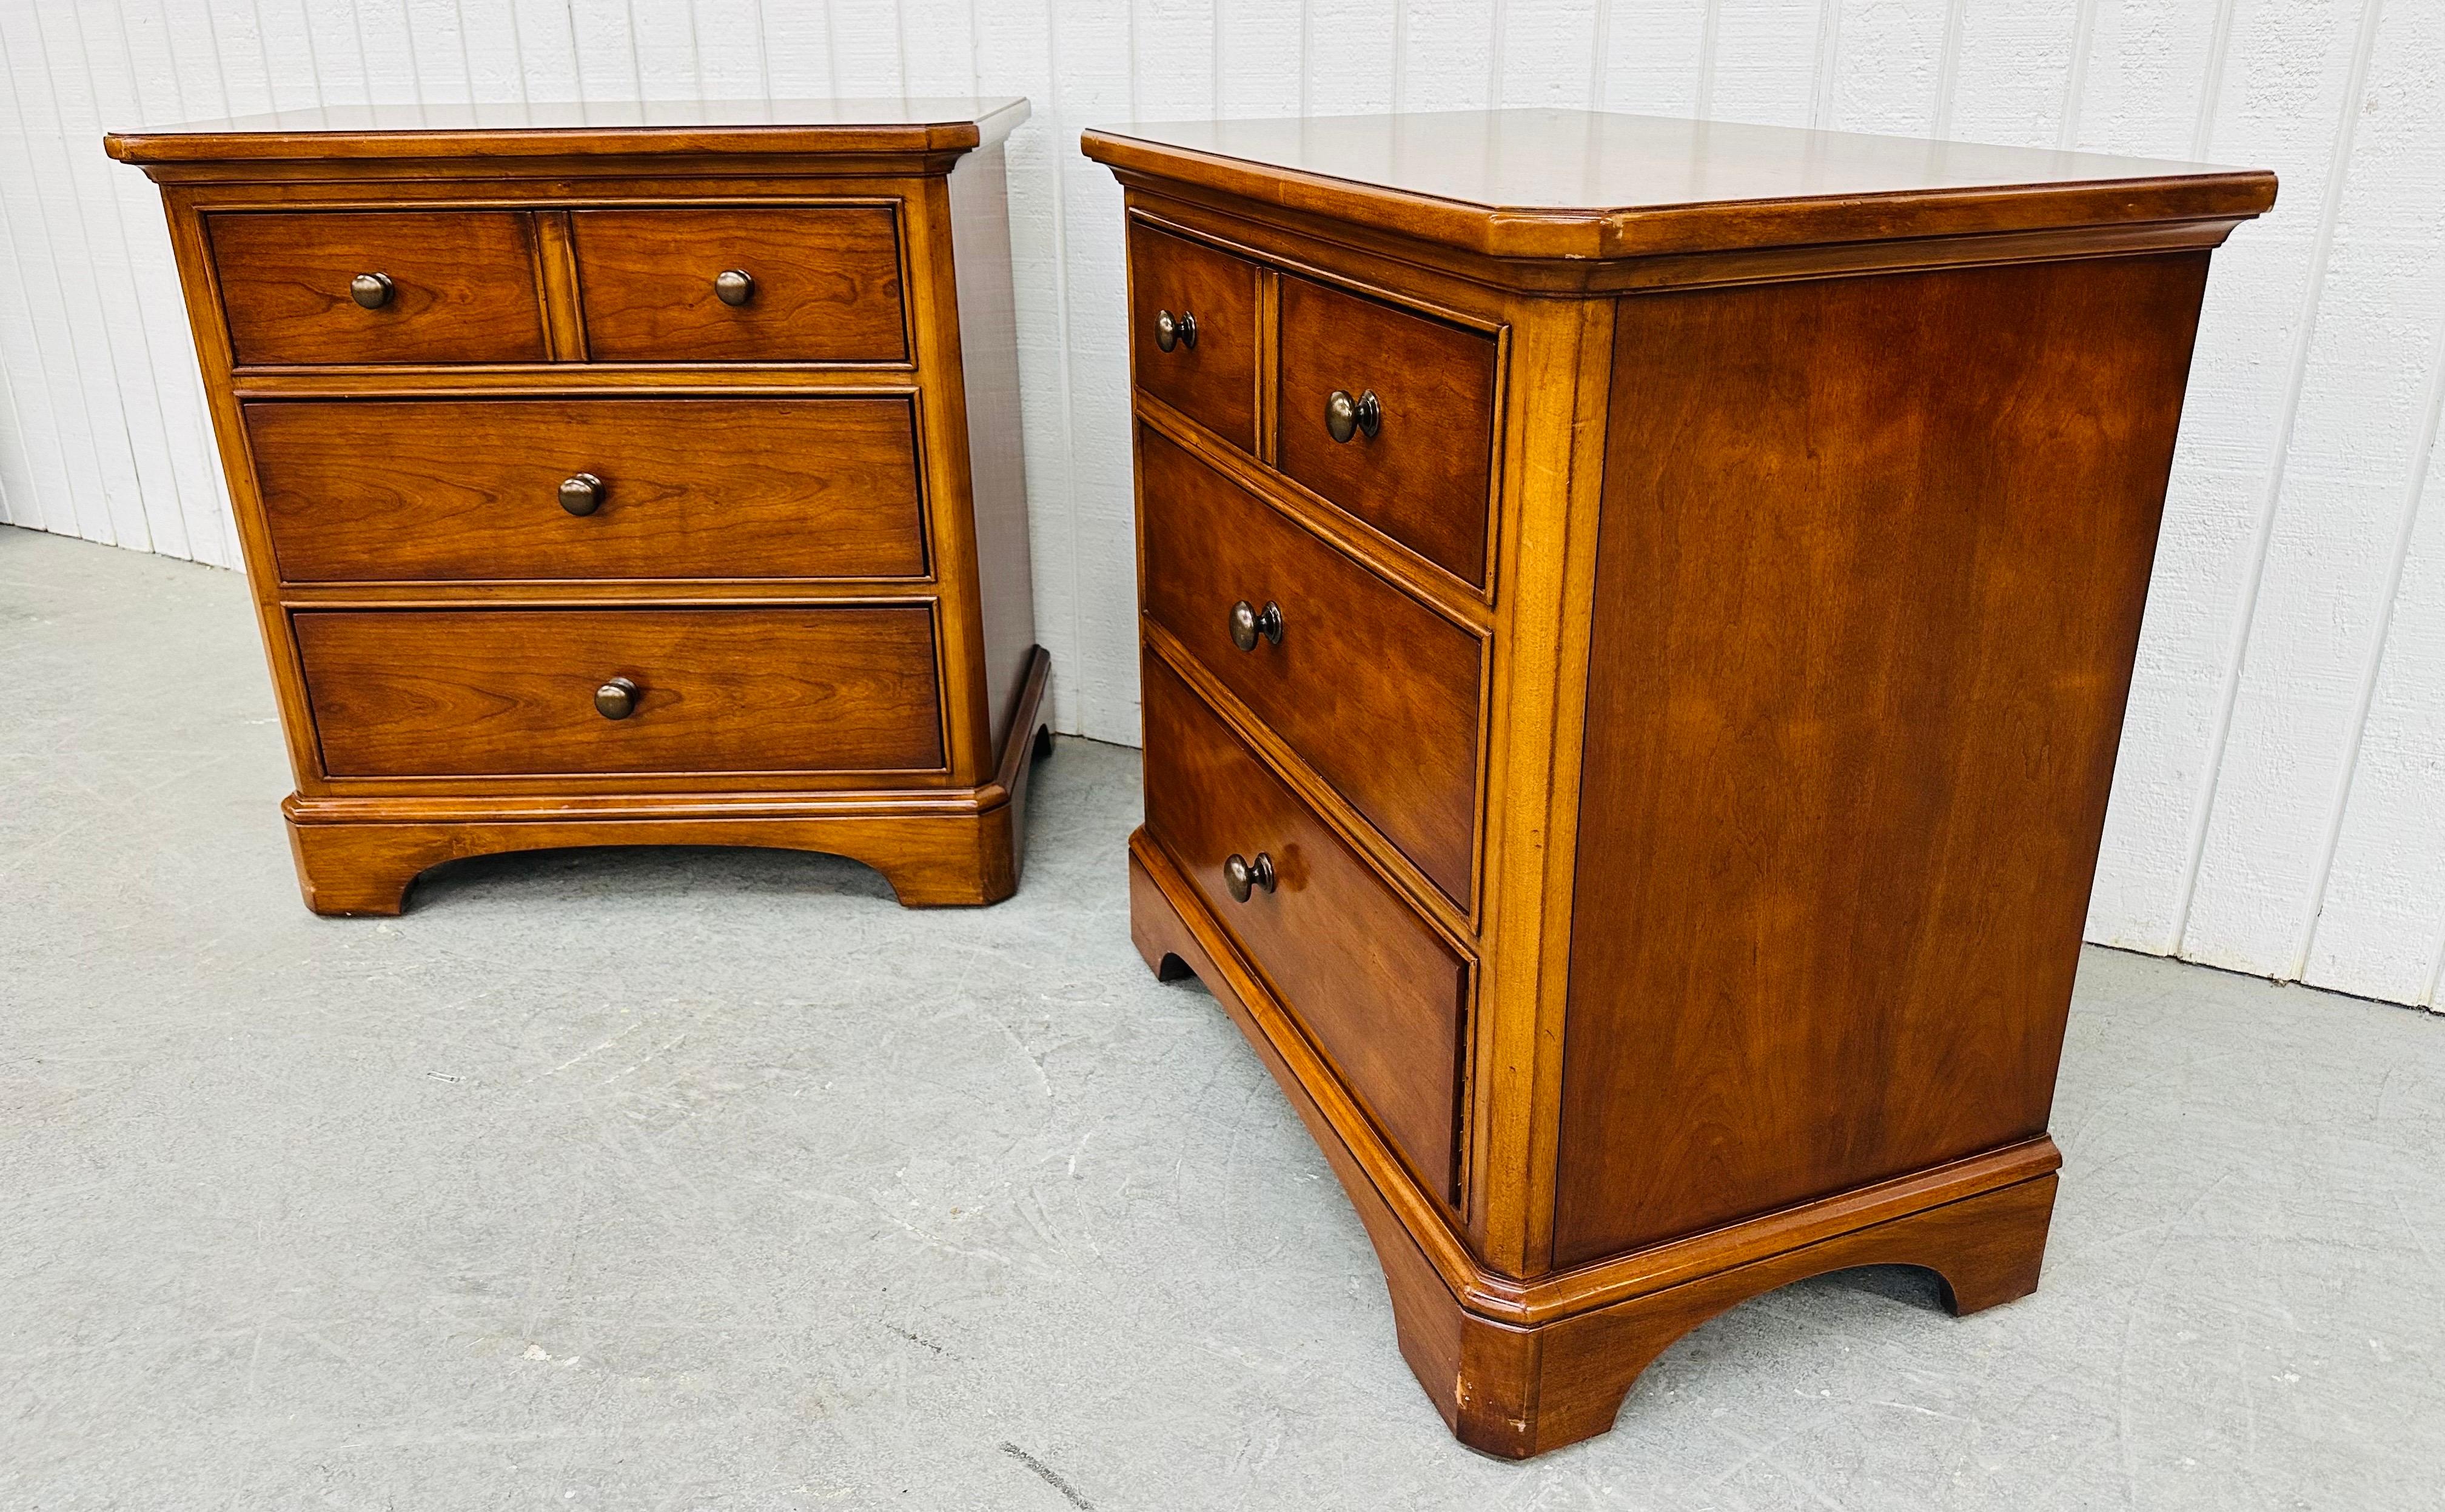 This listing is for a pair of Vintage Thomasville Cherry Bachelor Chest Nightstands. Featuring a straight line design, three drawers for storage, original hardware, and a beautiful cherry finish. This is an exceptional combination of quality and